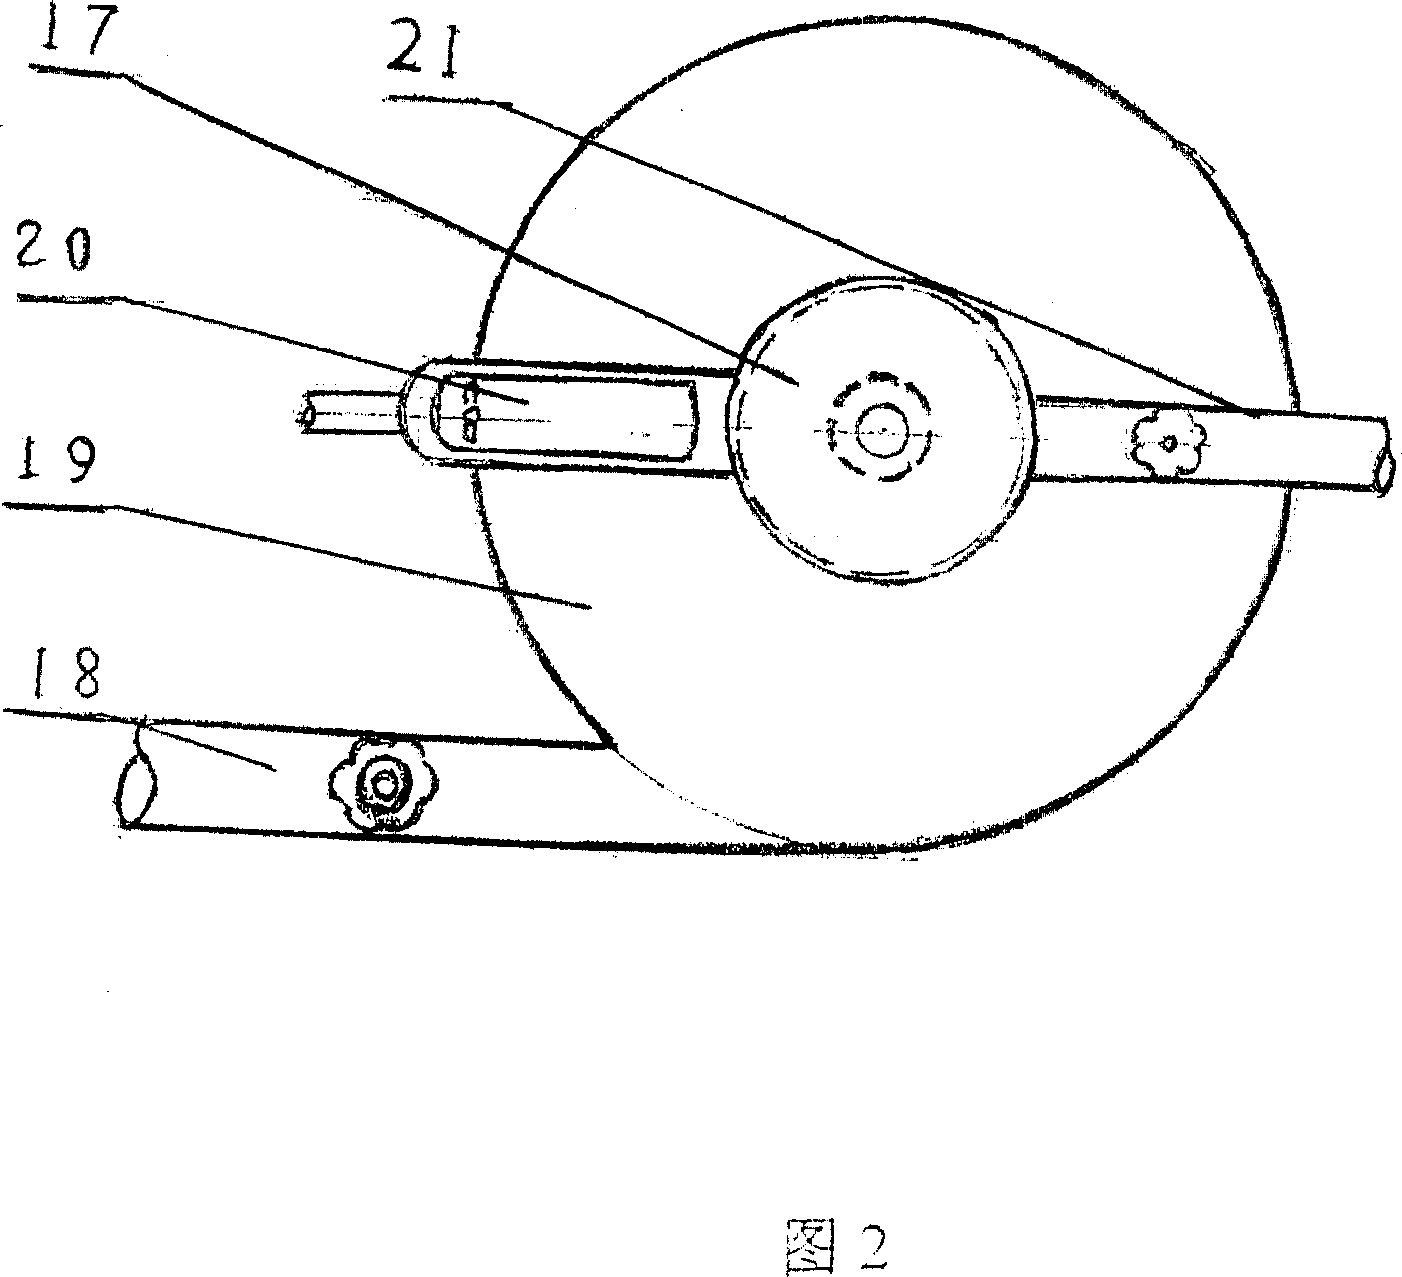 Electric wastewater treating apparatus